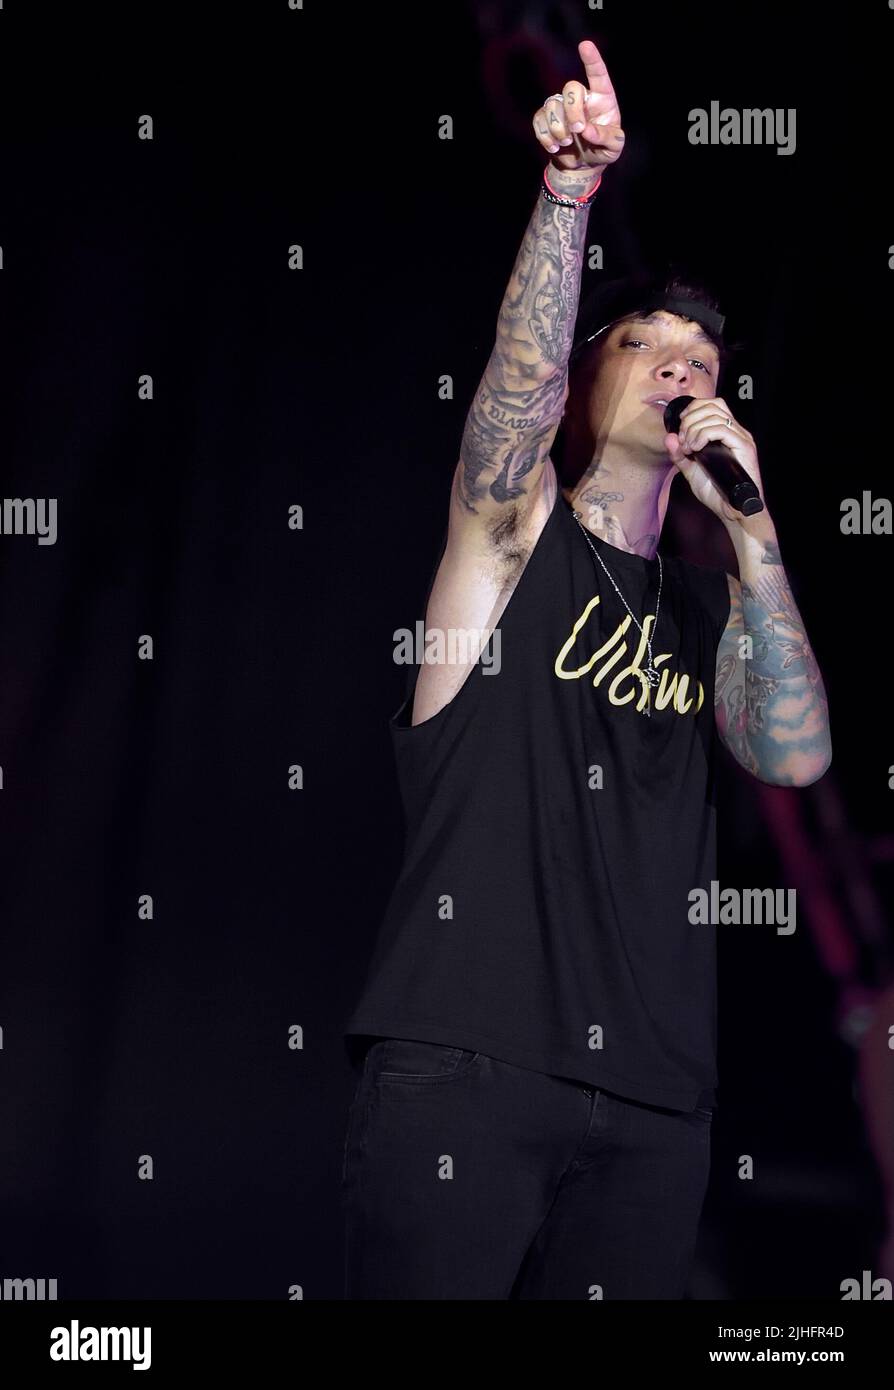 Rome, Italy. 17th July, 2022. The Italian singer Ultimo, pseudonym of Niccolò Moriconi, performs at the Circus Maximus in Rome on July 17, 2022 in Rome, Italy. Credit: dpa/Alamy Live News Stock Photo